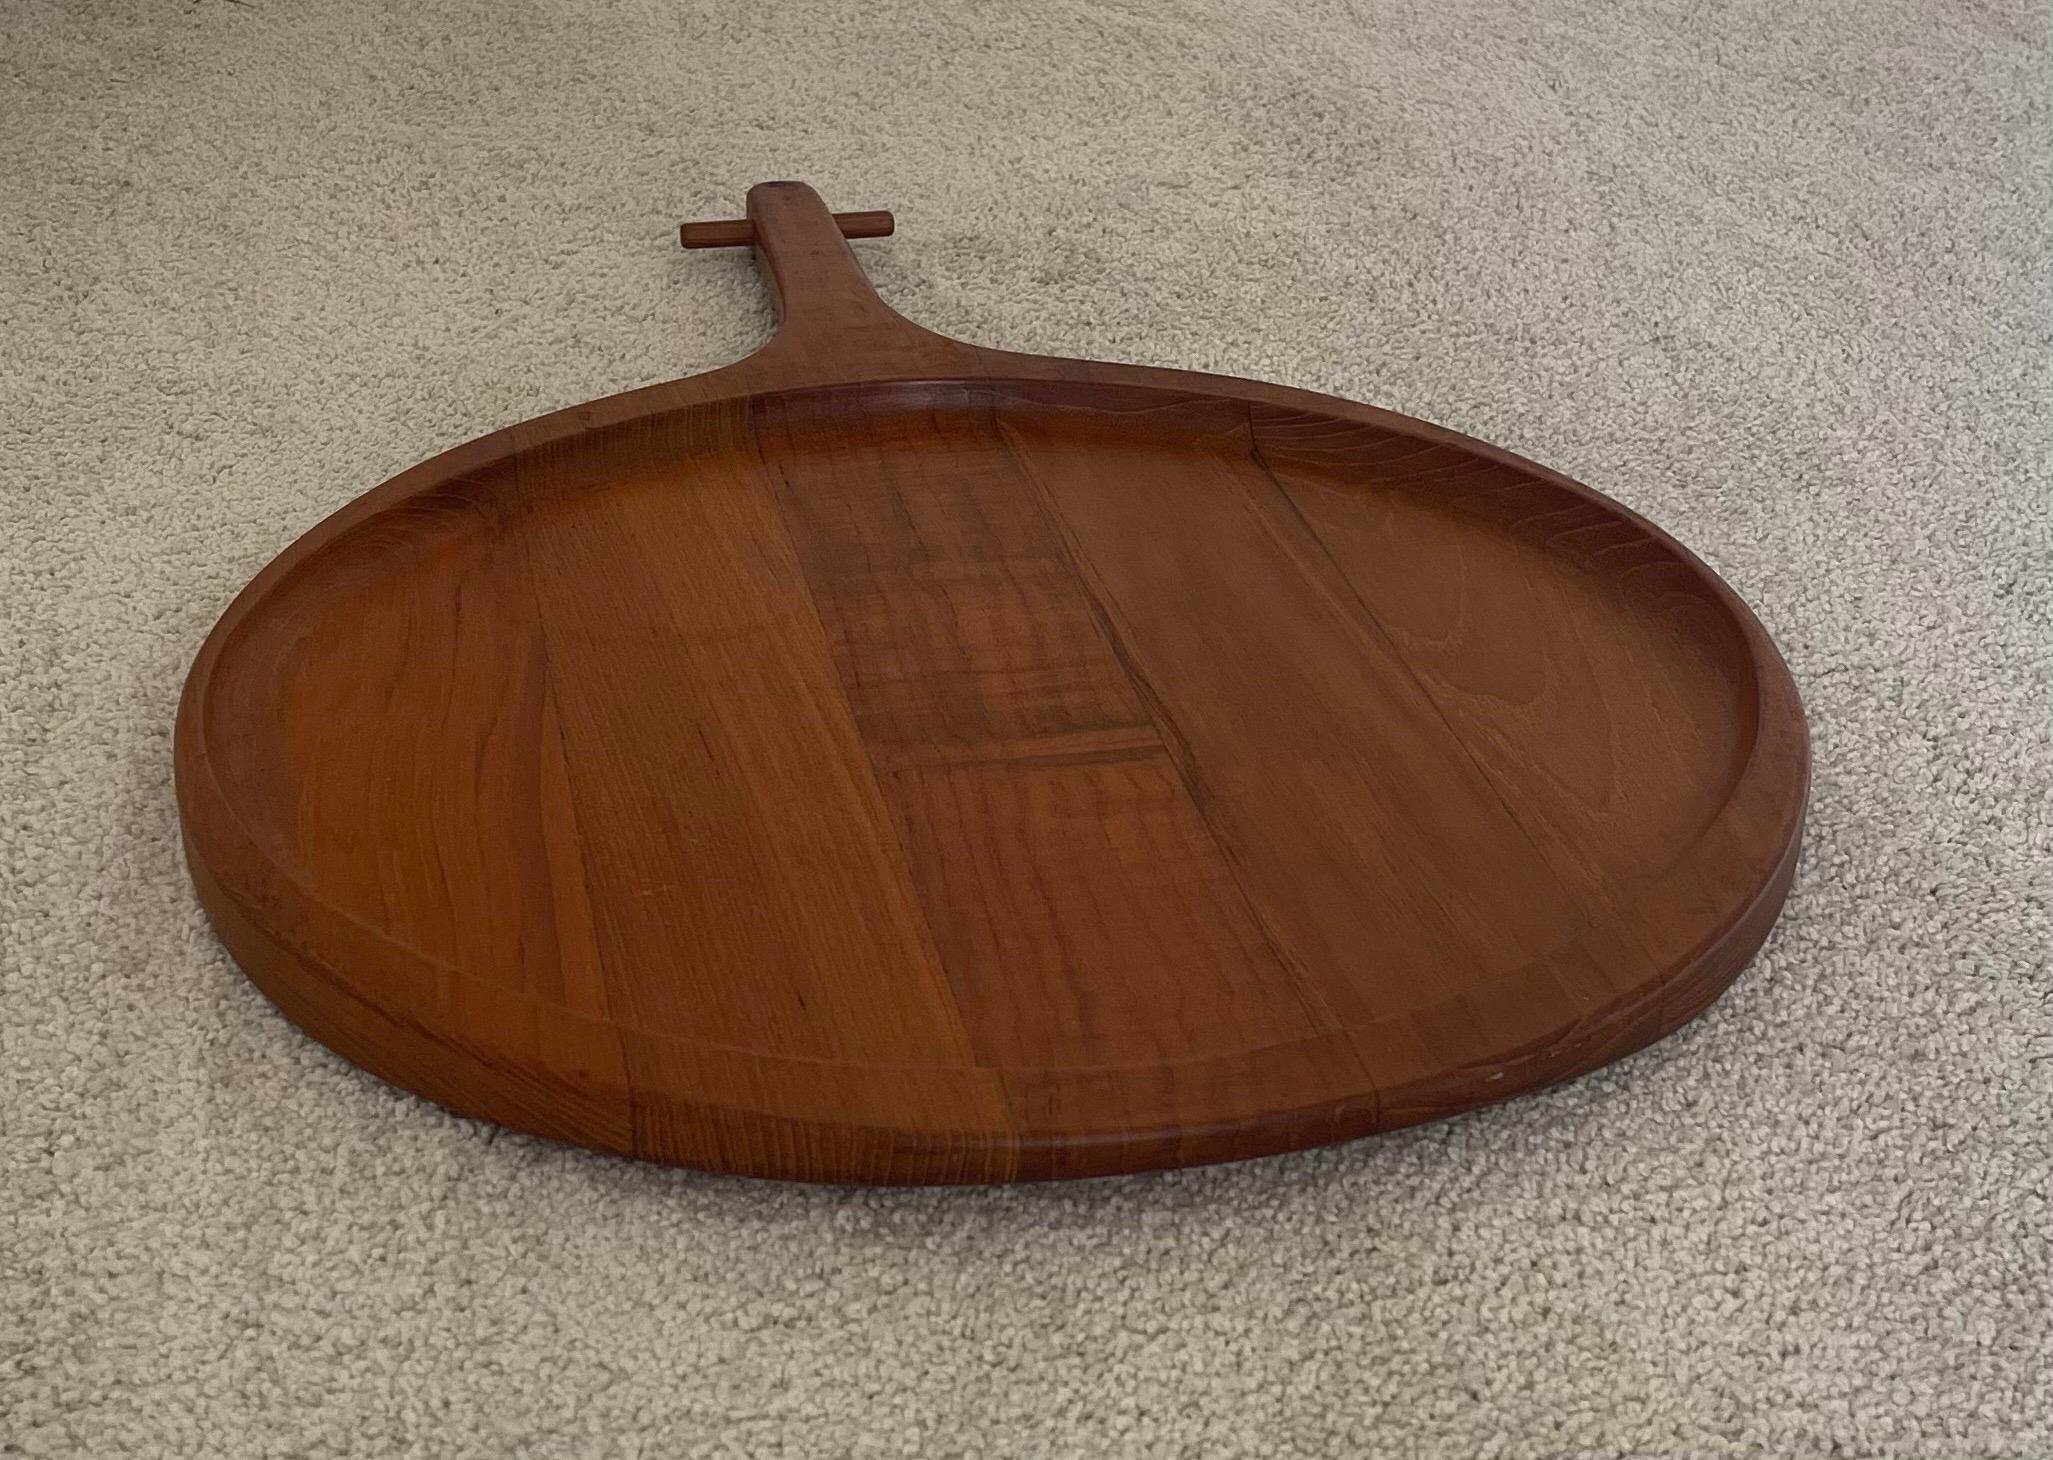 20th Century Staved Teak Tray or Cutting Board by Sigvard Nilsson for a.B. Sowe Konst For Sale